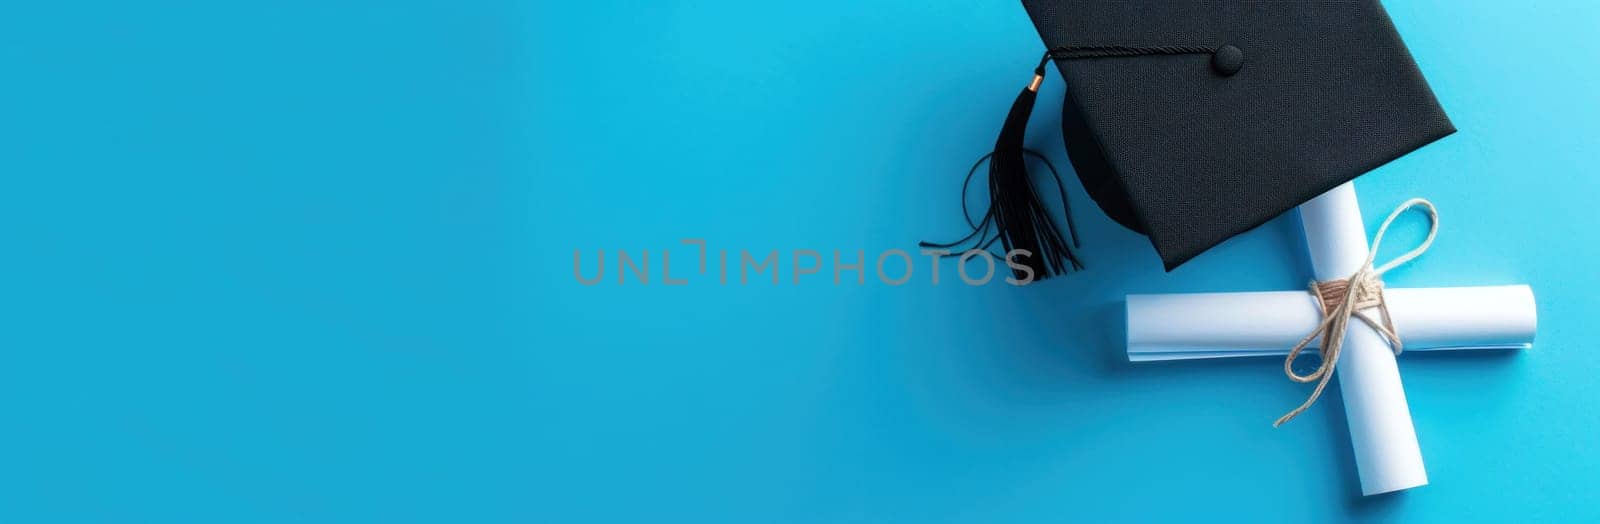 Graduation cap and diploma on blue background with copy space for text or image in education and achievement theme